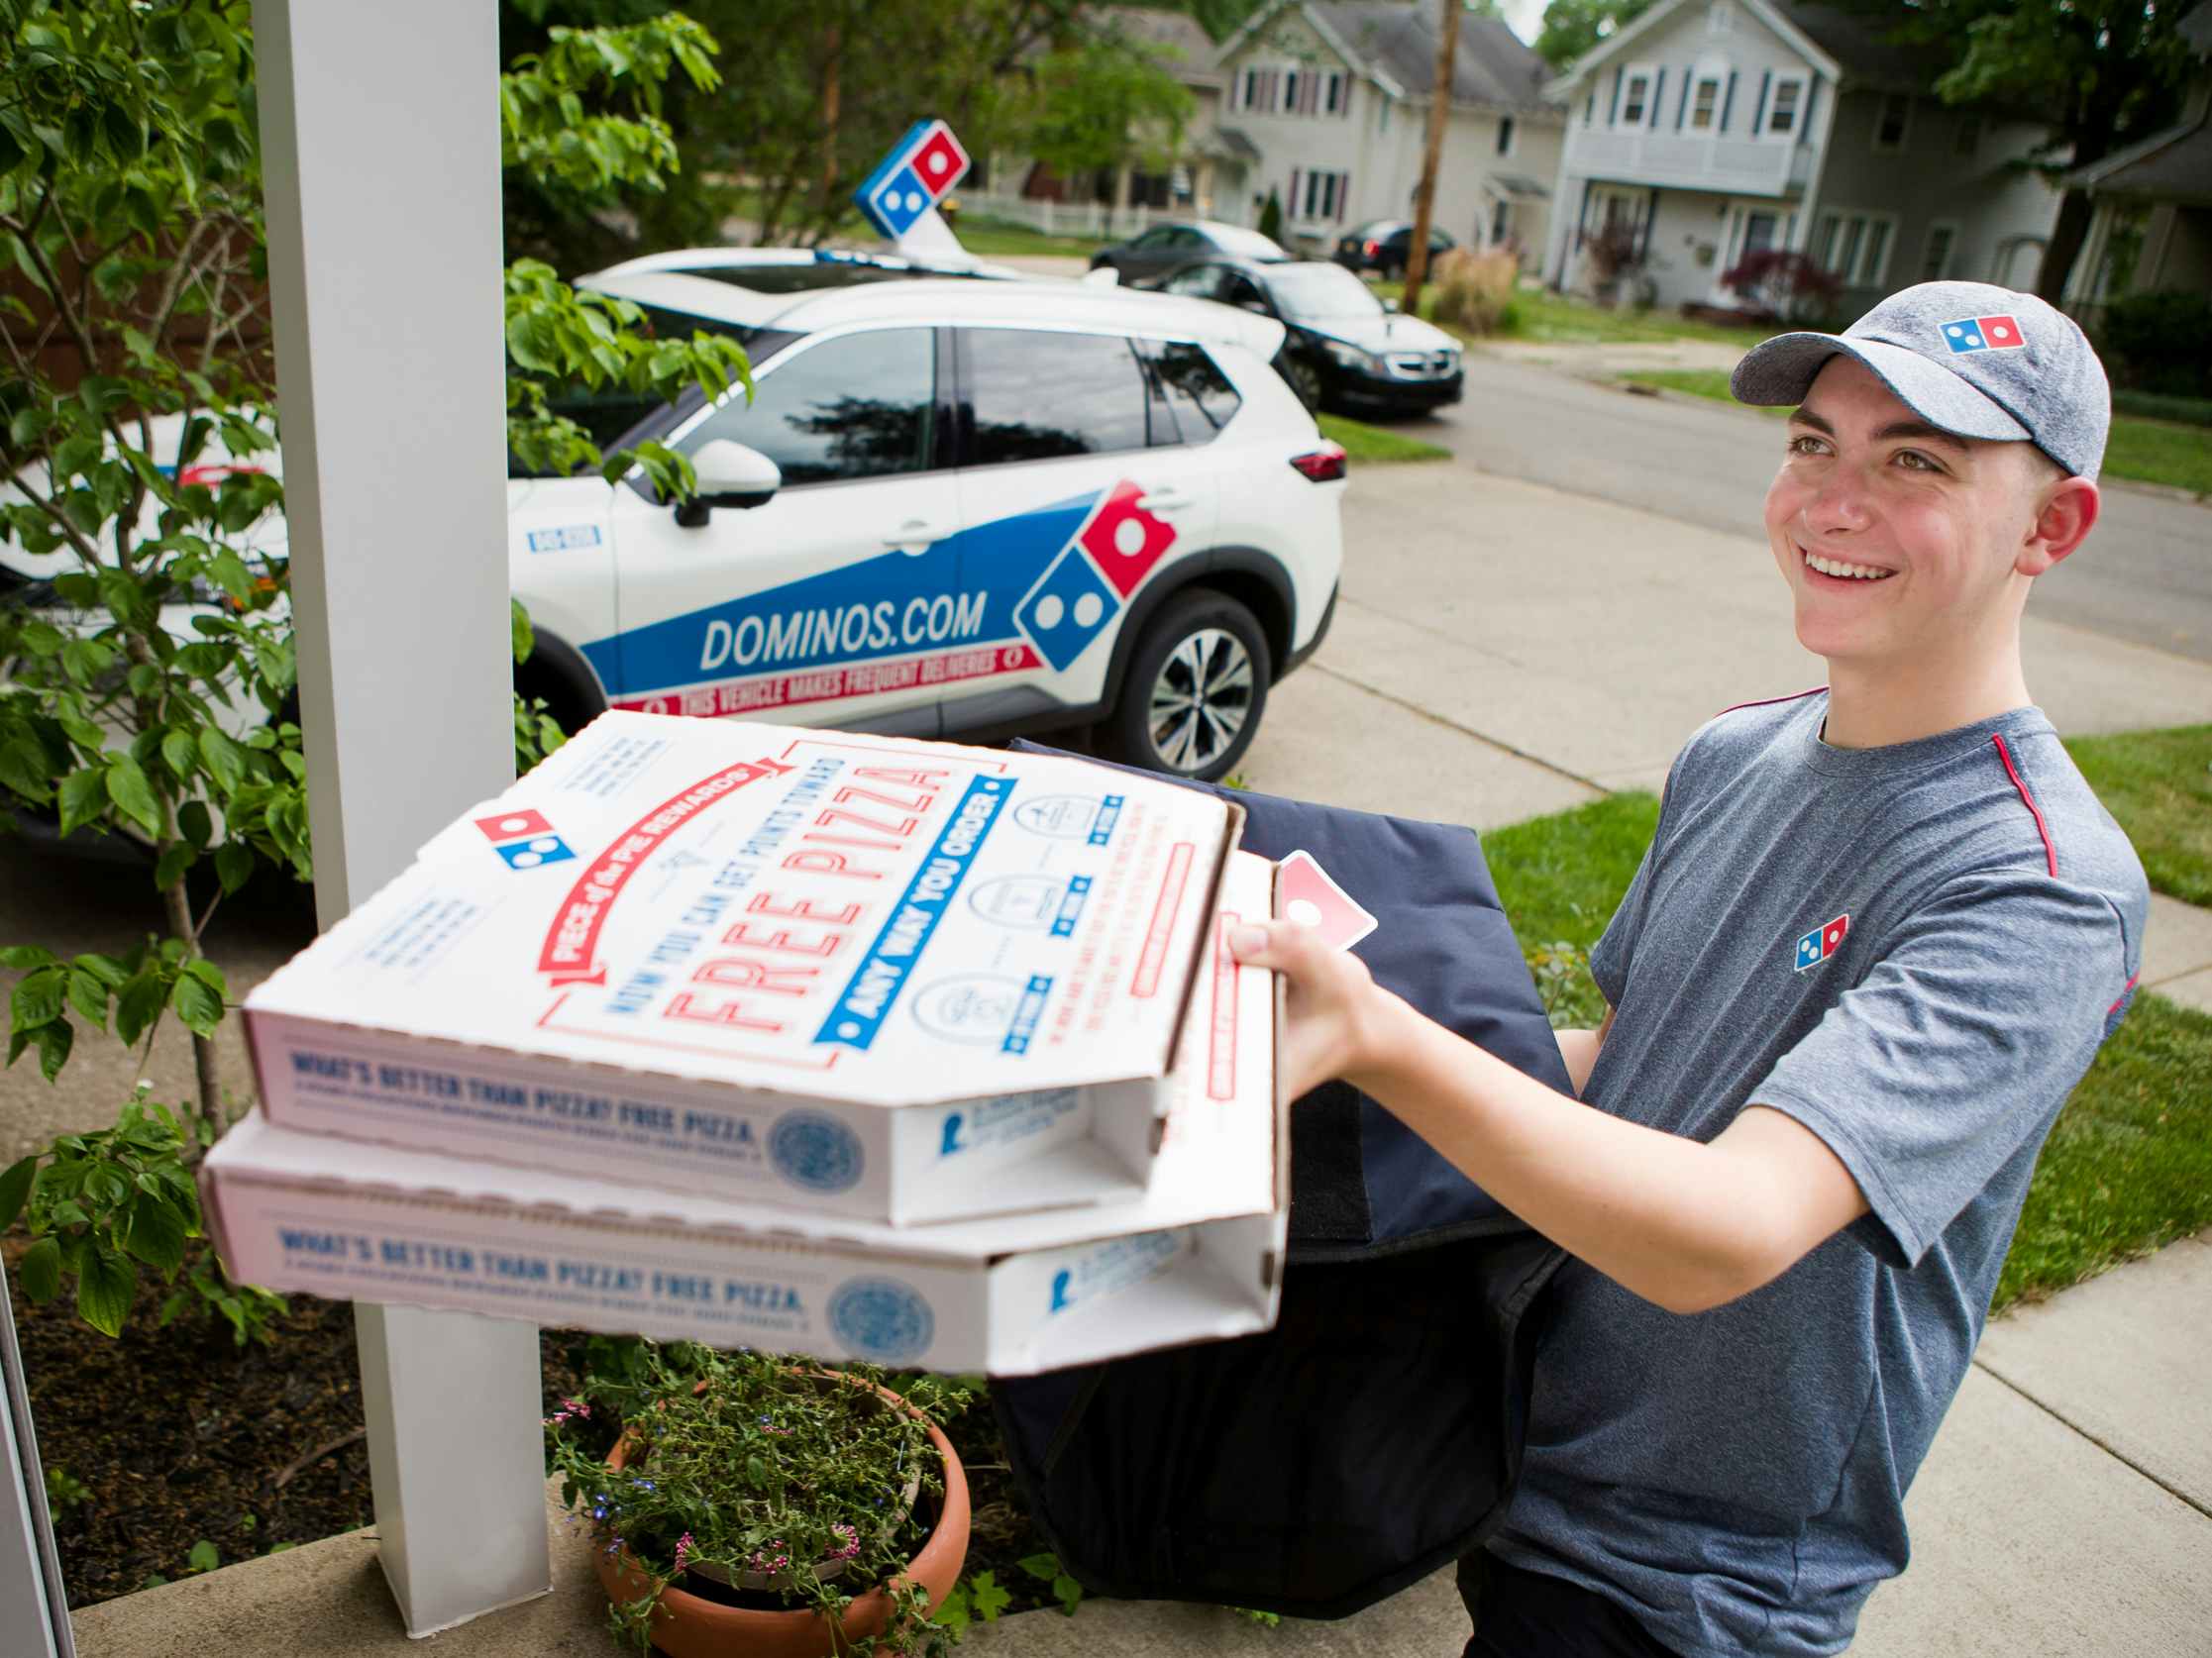 A Domino's Employee delivering pizzas to someone's house